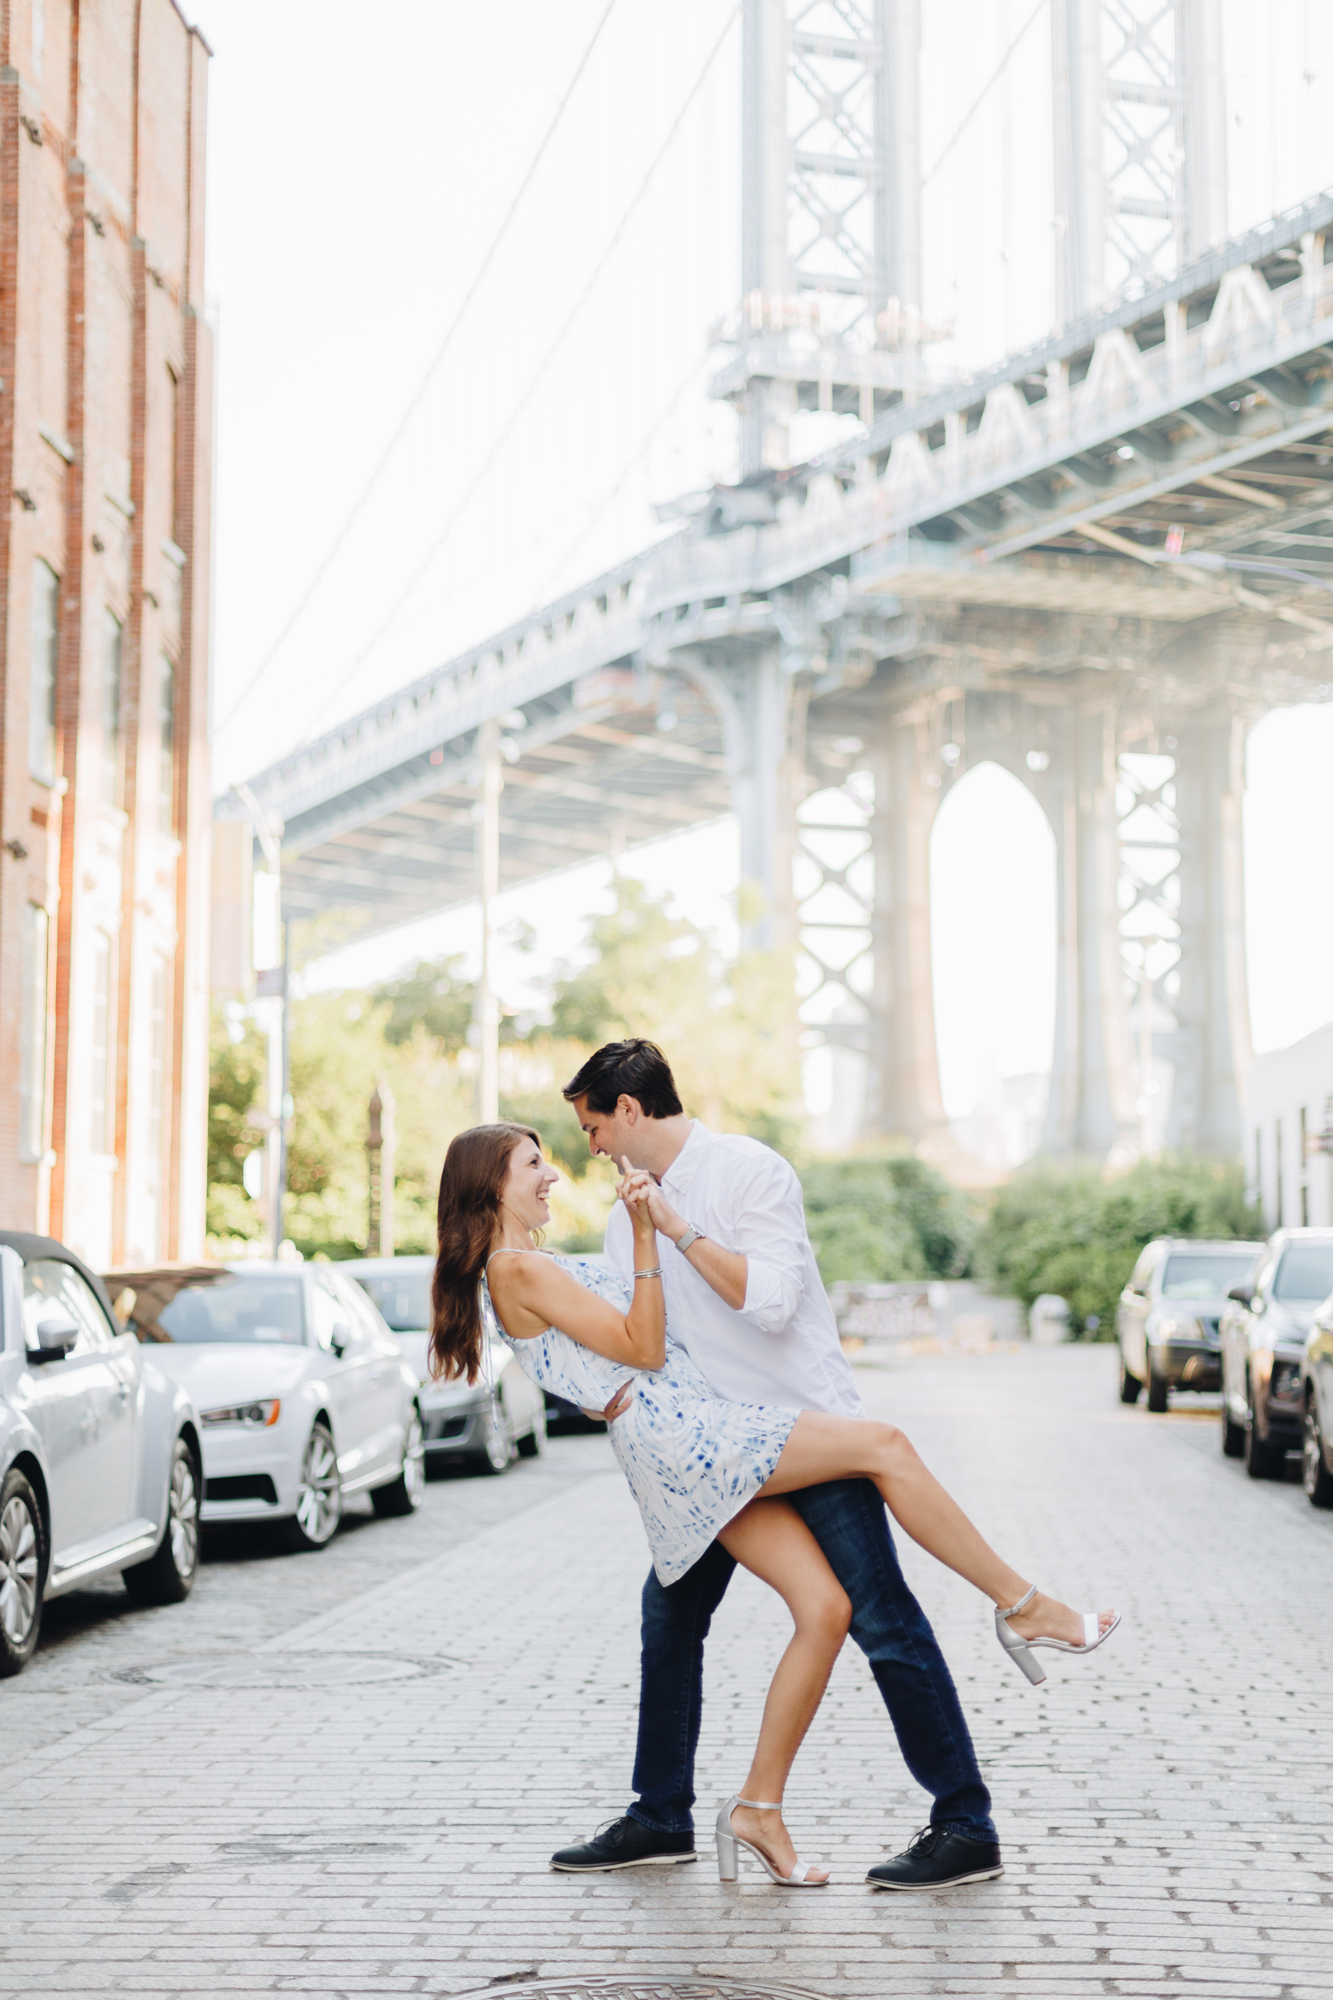 Picture-Perfect Brooklyn Bridge Engagement Photos